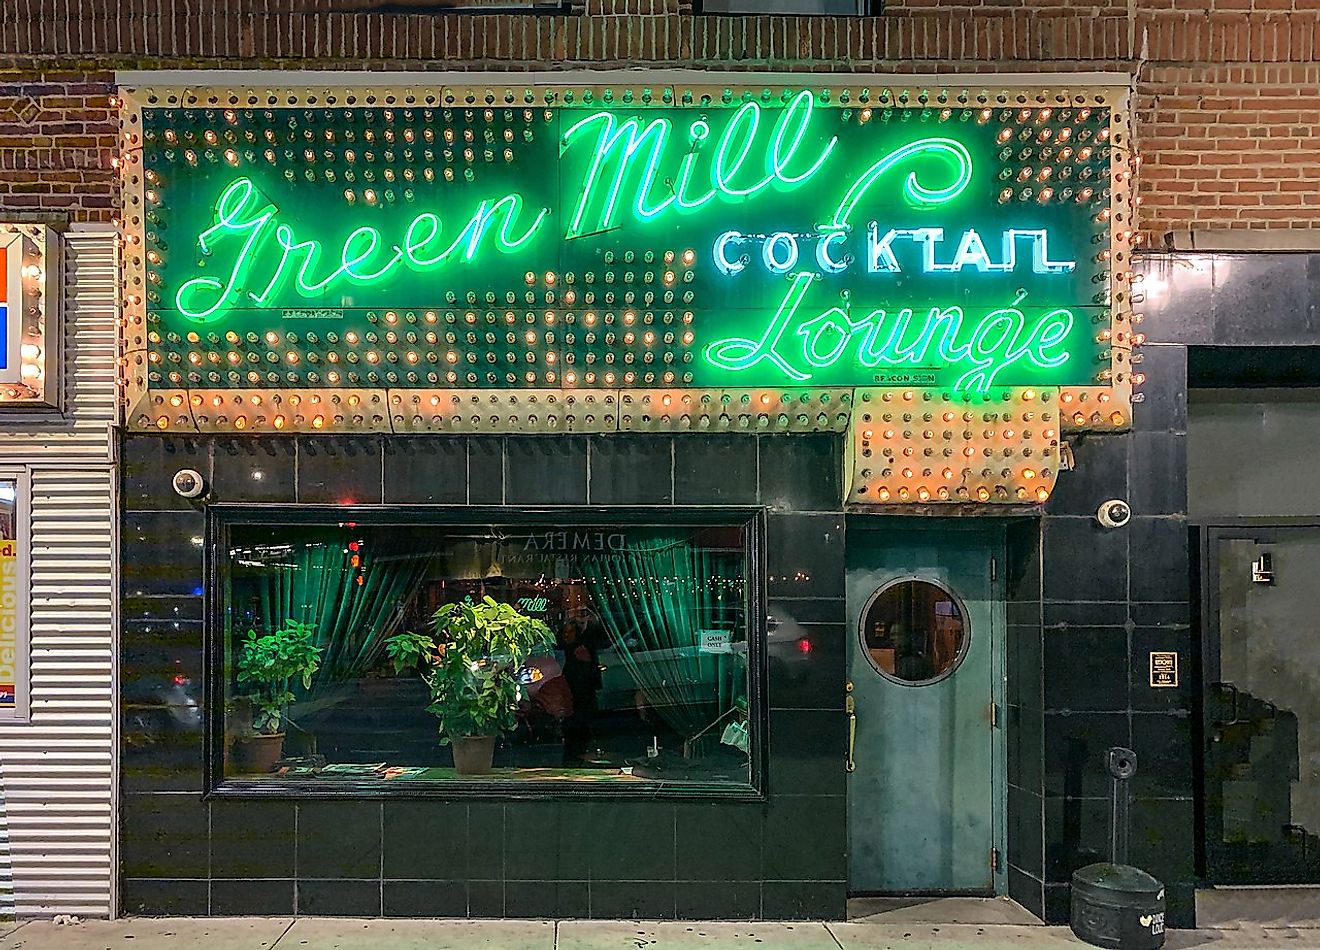 Green Mill Cocktail Lounge, Chicago. Image credit: Kenneth C. Zirkel/Wikimedia.org